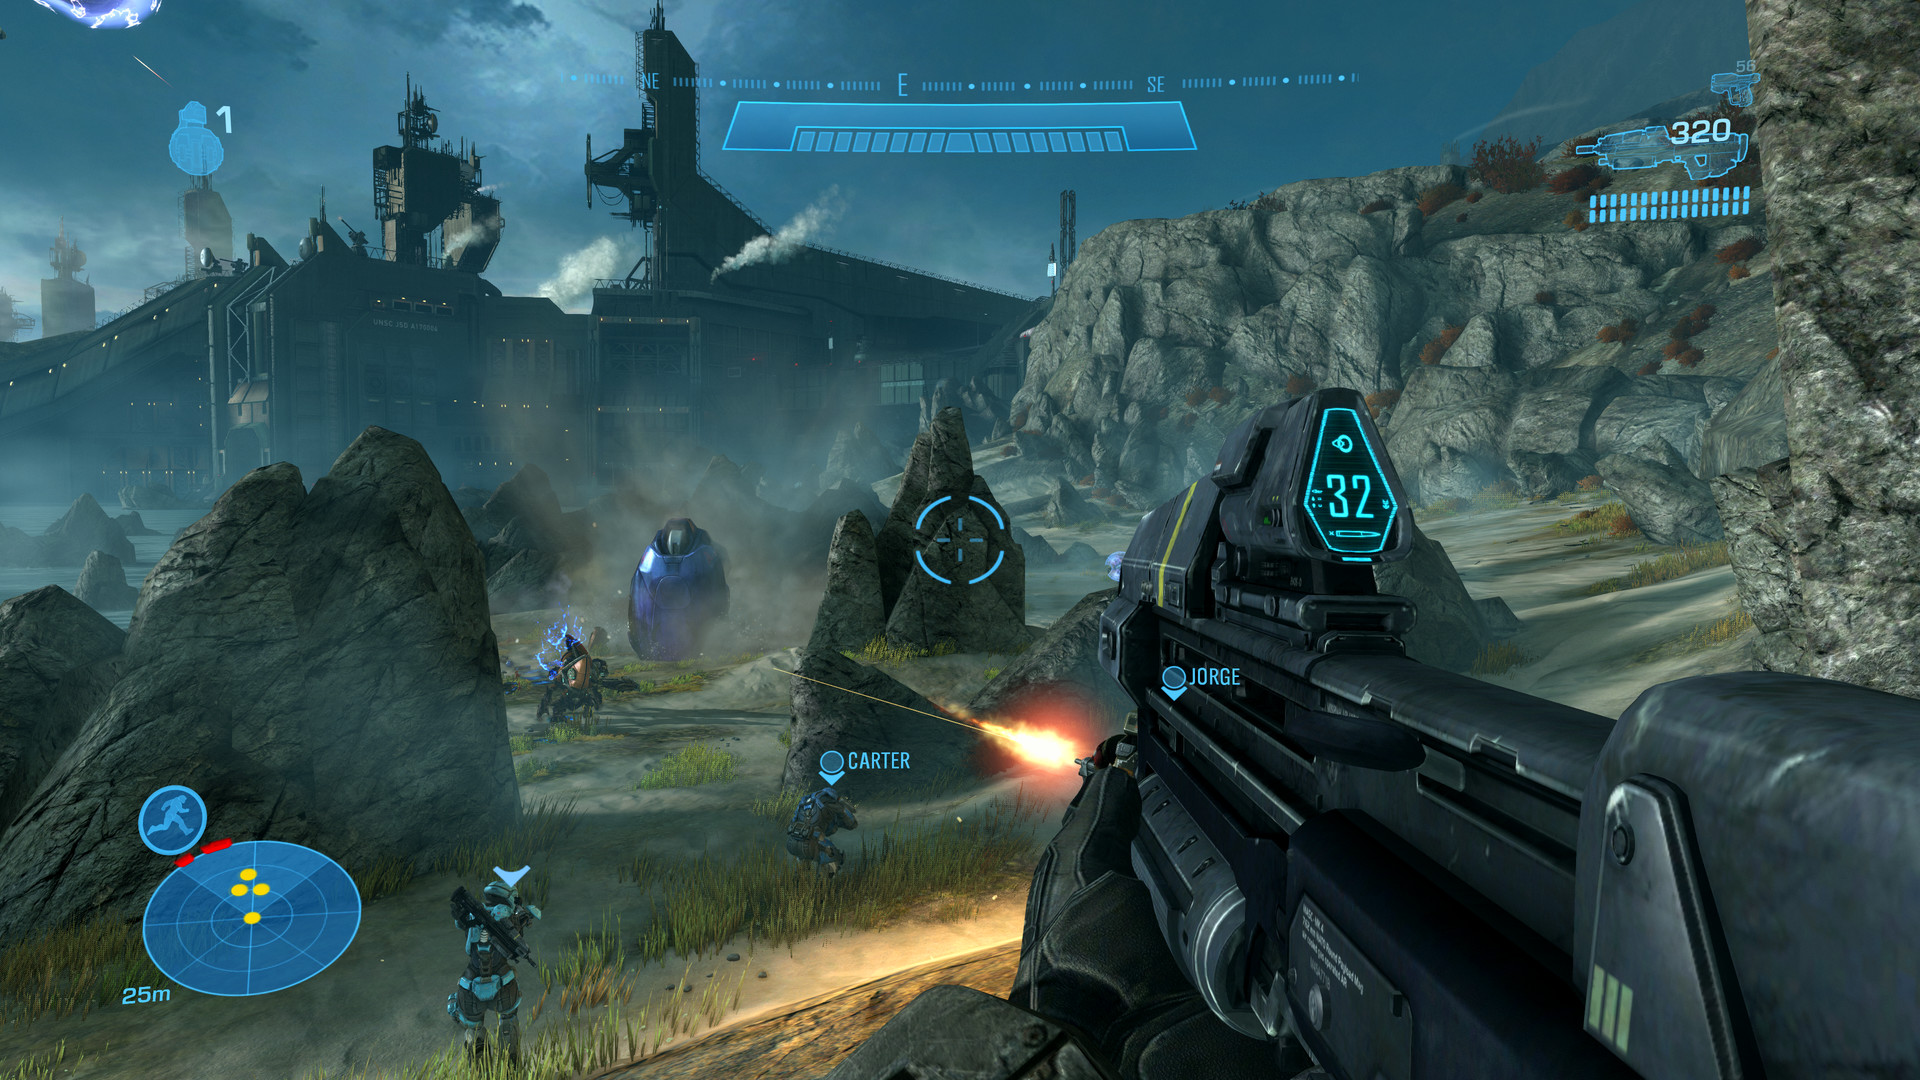 How to Play Halo Reach Online